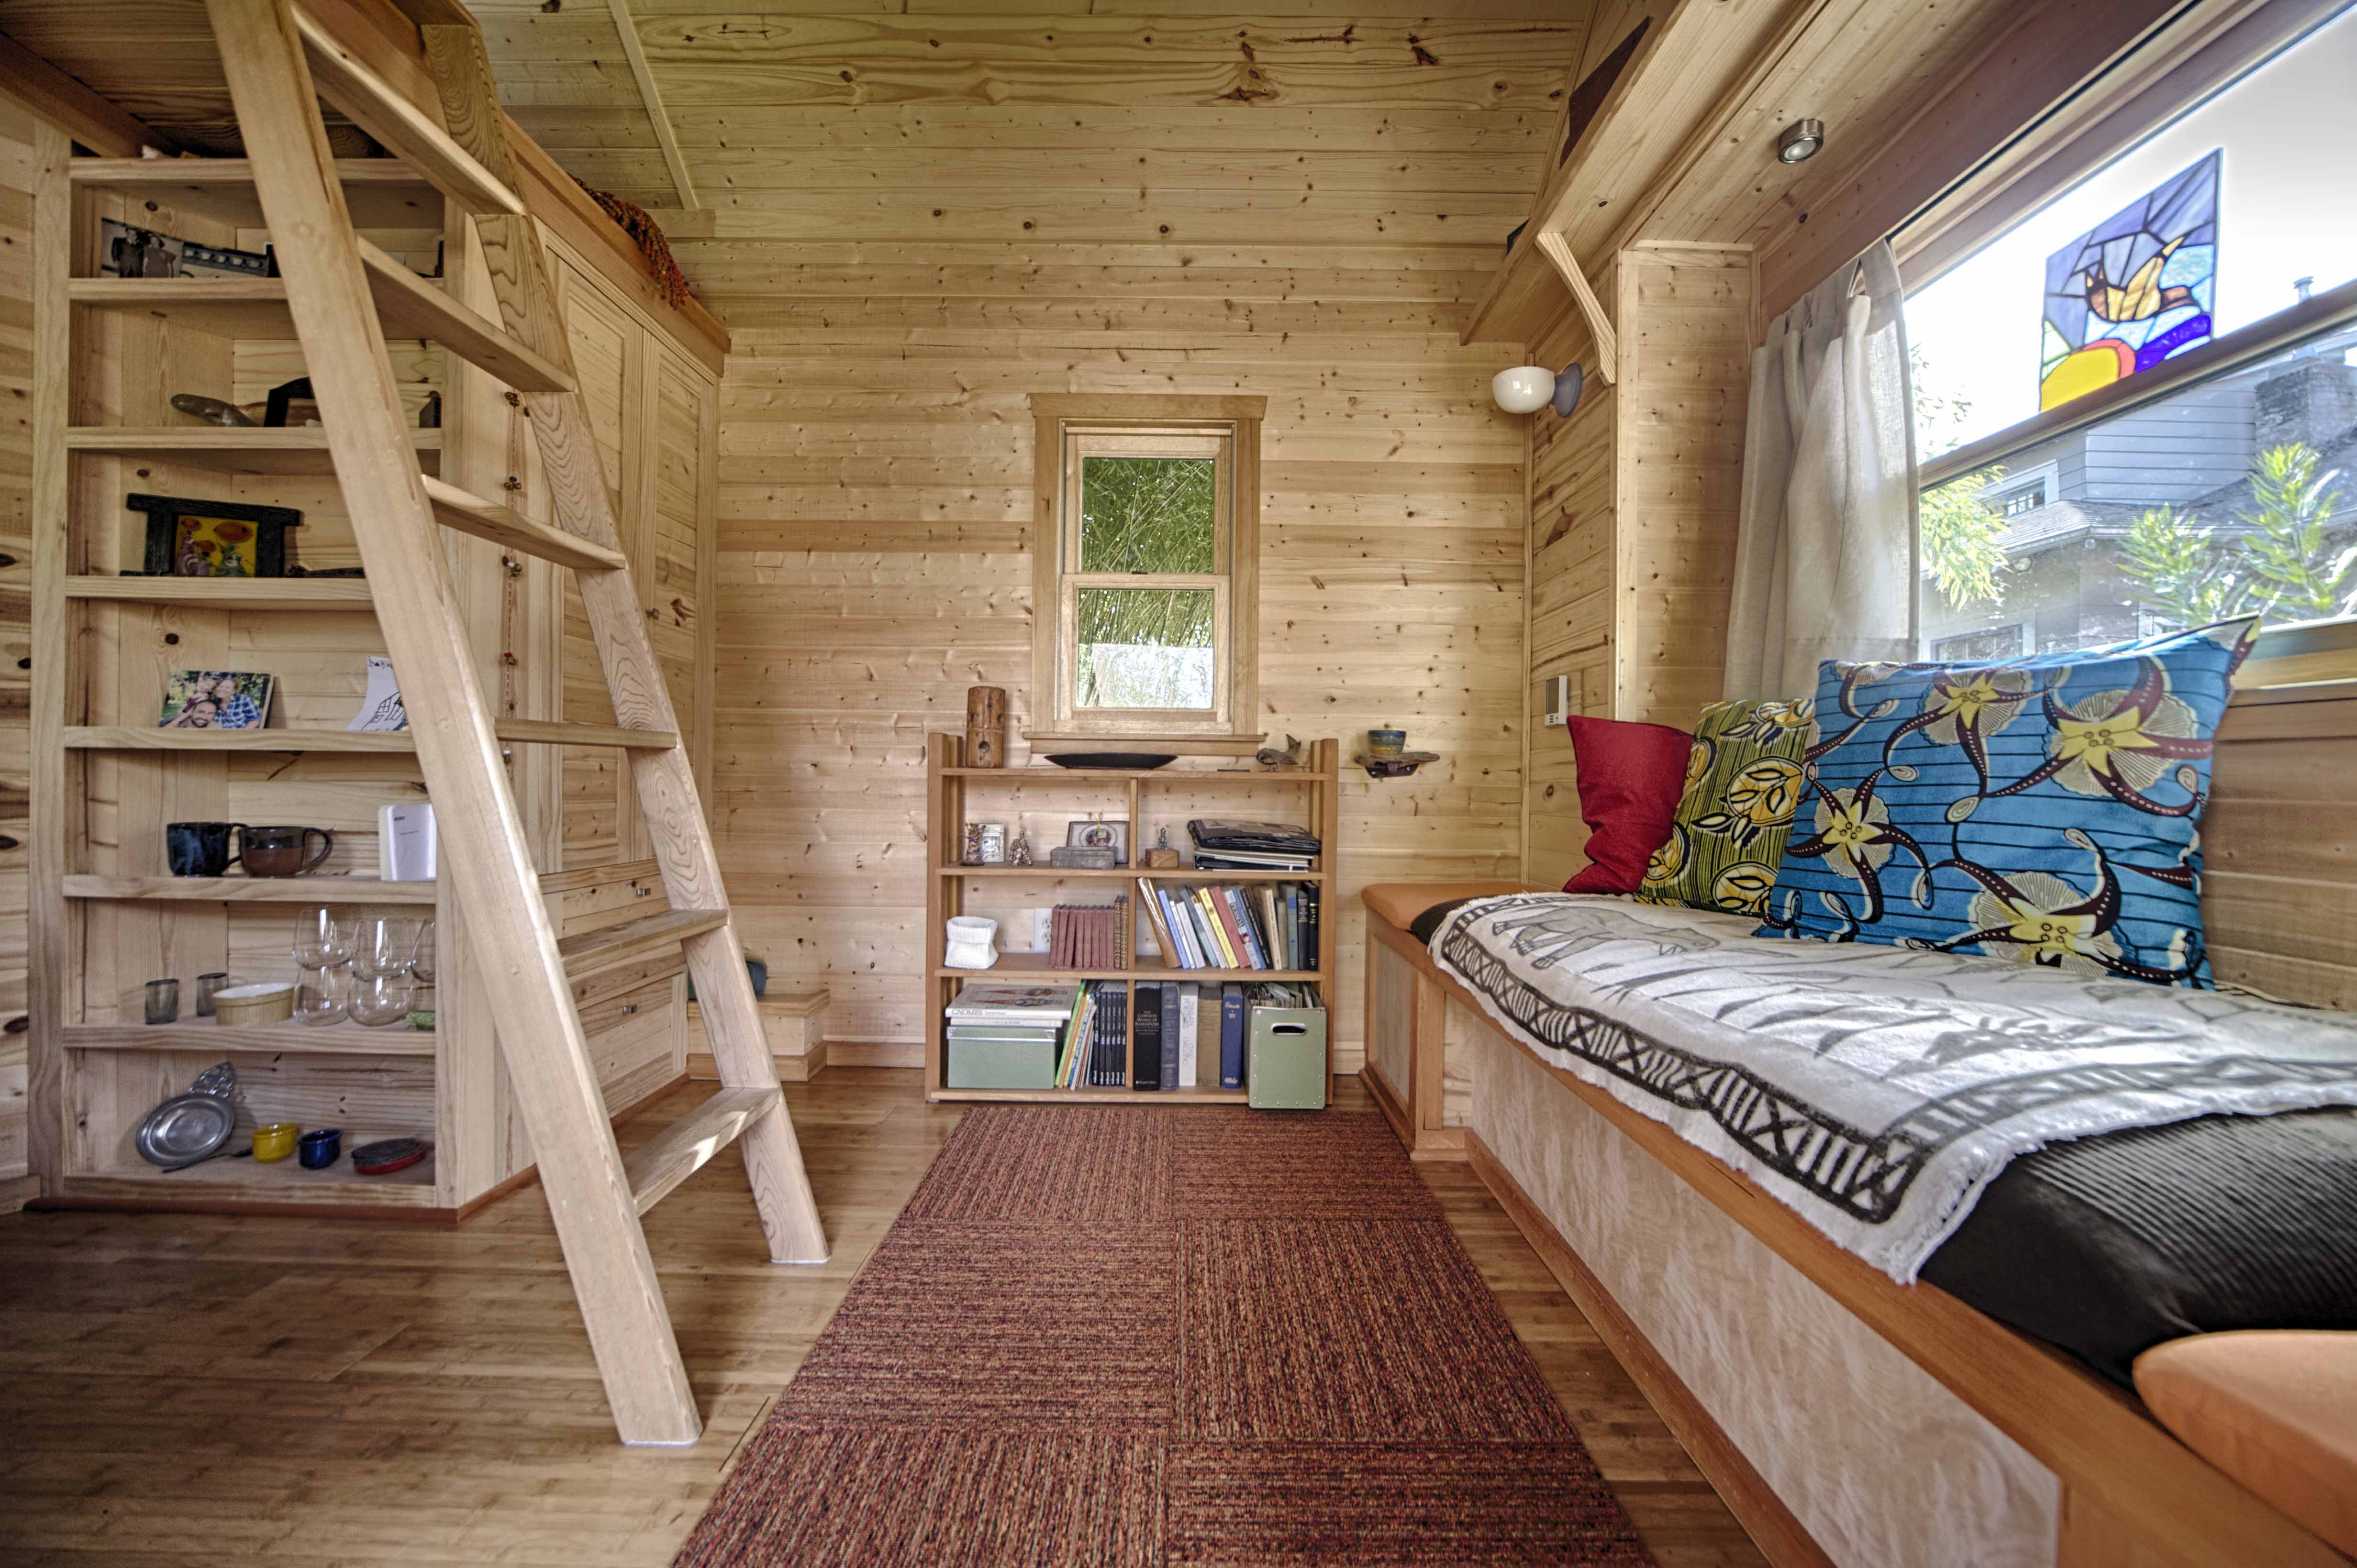 The Sweet Pea Tiny  House  Plans  PADtinyhouses com